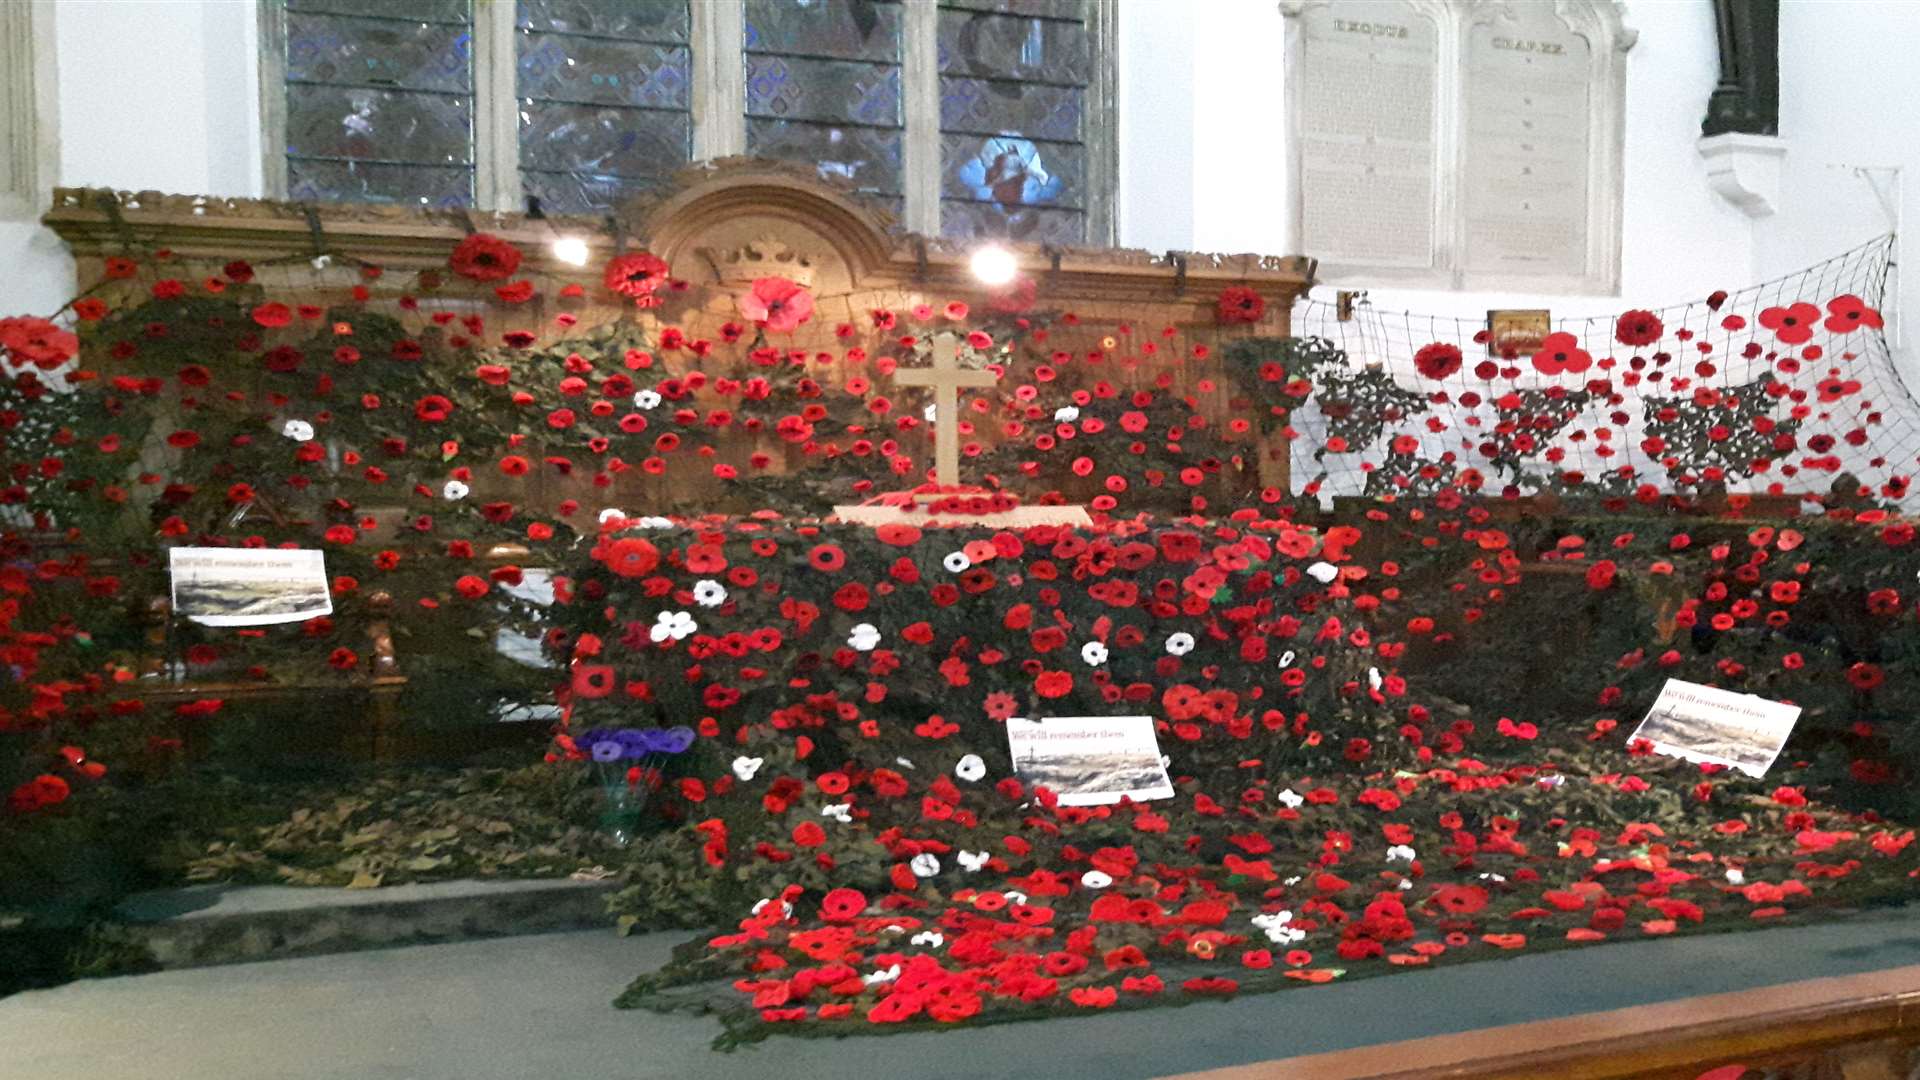 The stunning display made up of more than 2,500 handcrafted poppies inside Kingsdown church